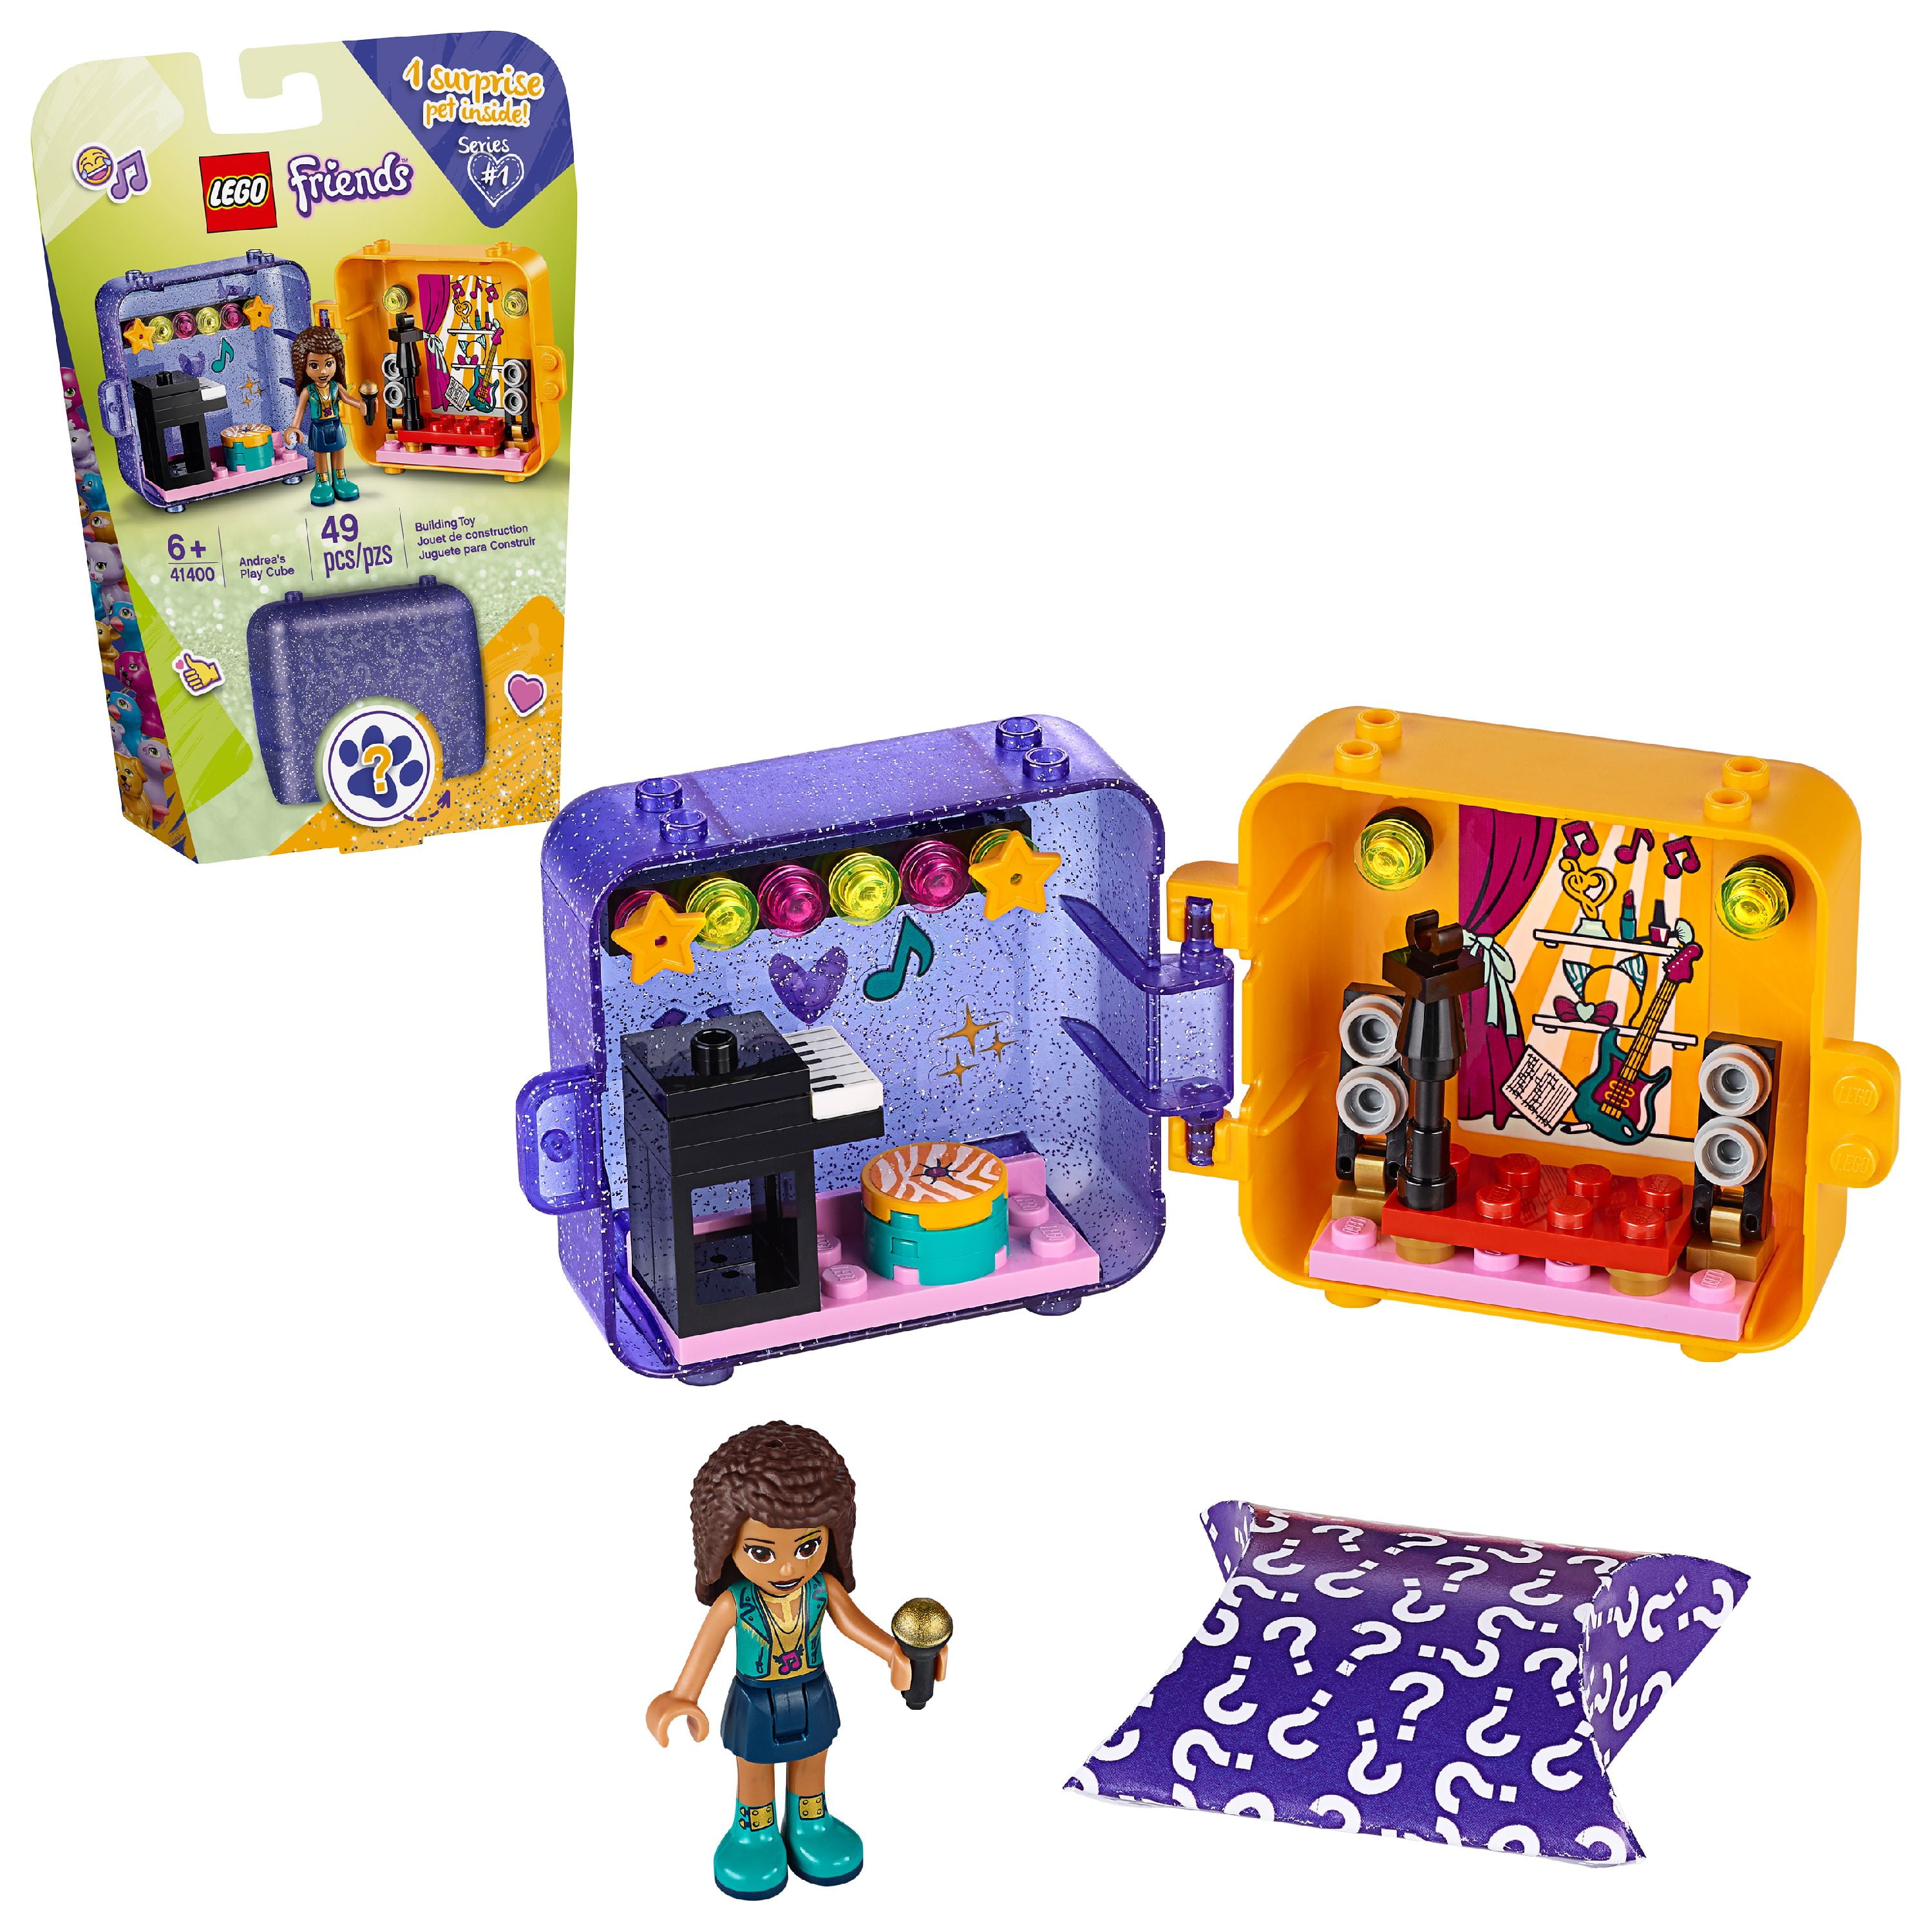 40 Pieces Playset Includes Collectible Mini-Doll New 2020 for Imaginative Play LEGO Friends Mia’s Play Cube 41403 Building Kit